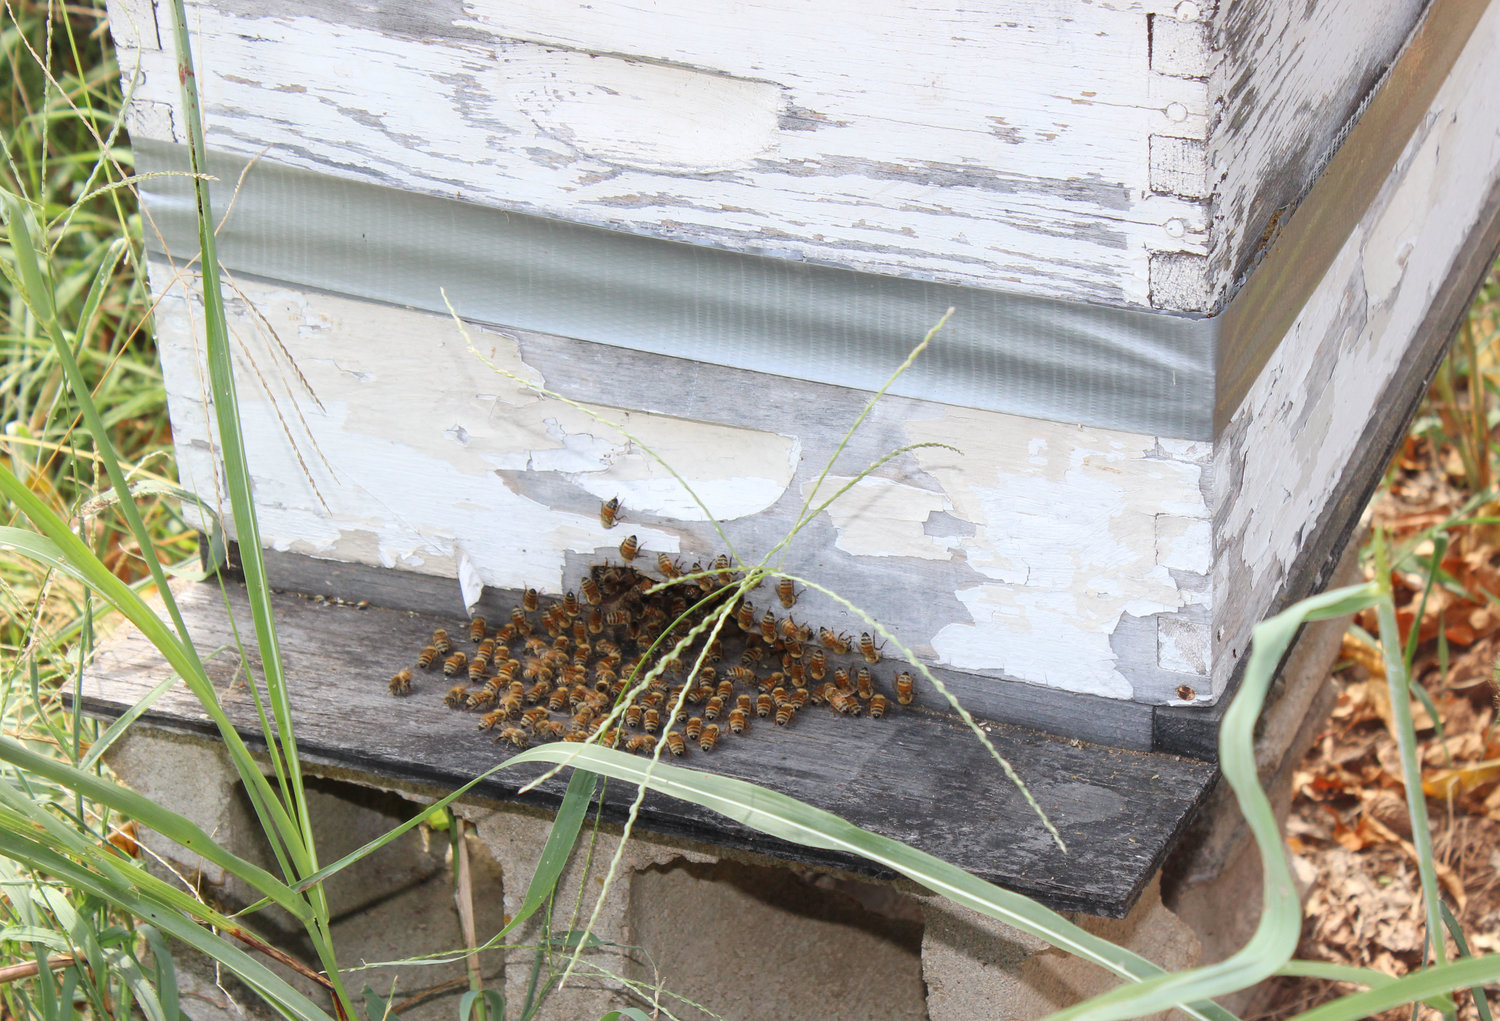 Bees-ness is booming - Purcell Register